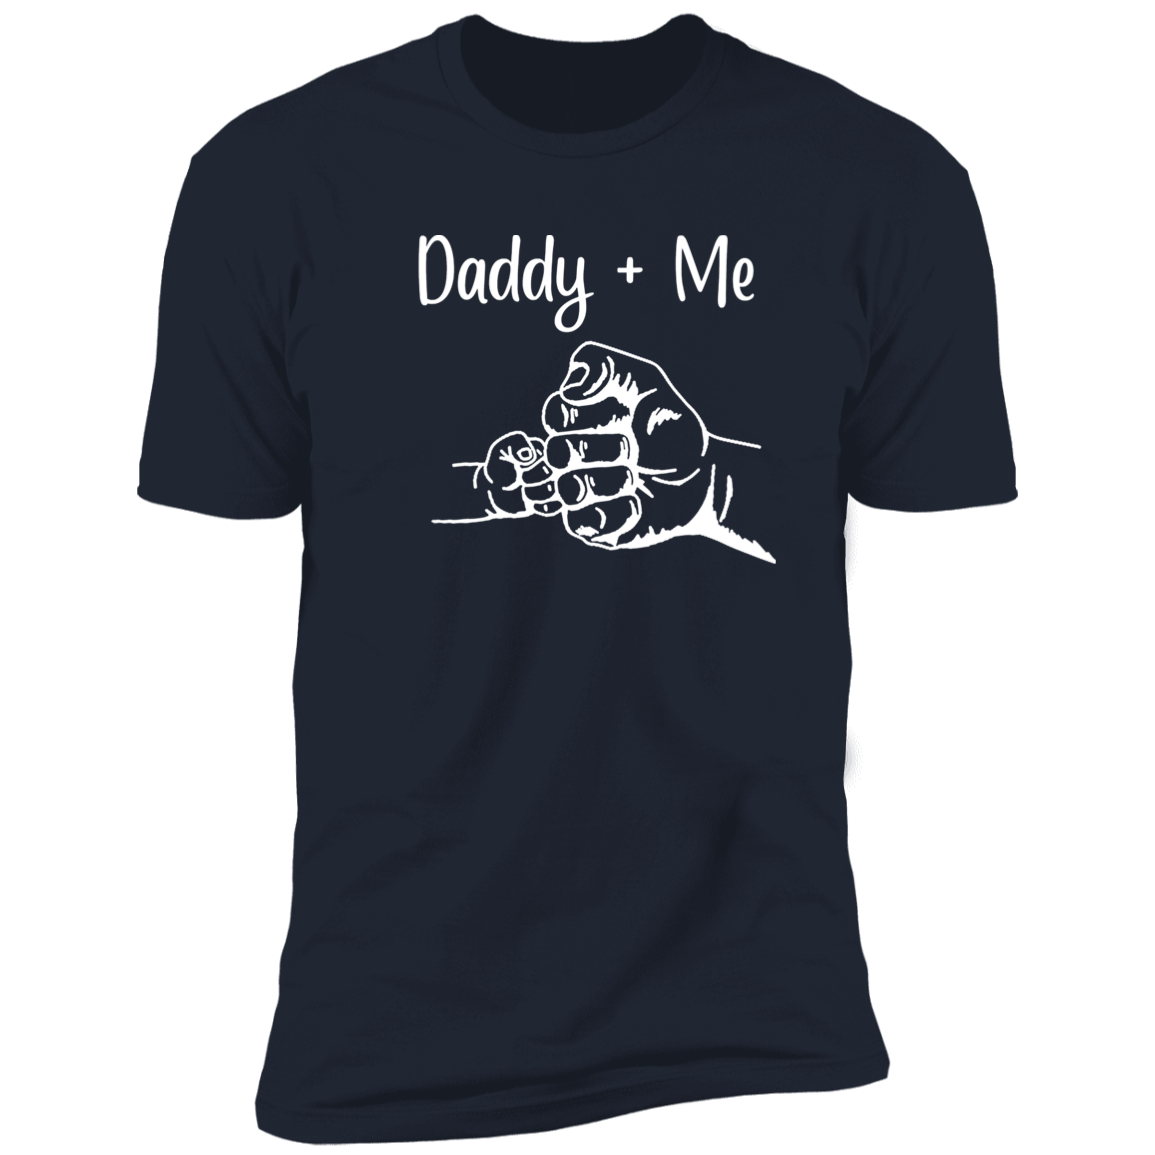 Daddy Me T Shirt We Want Ts Too 3221